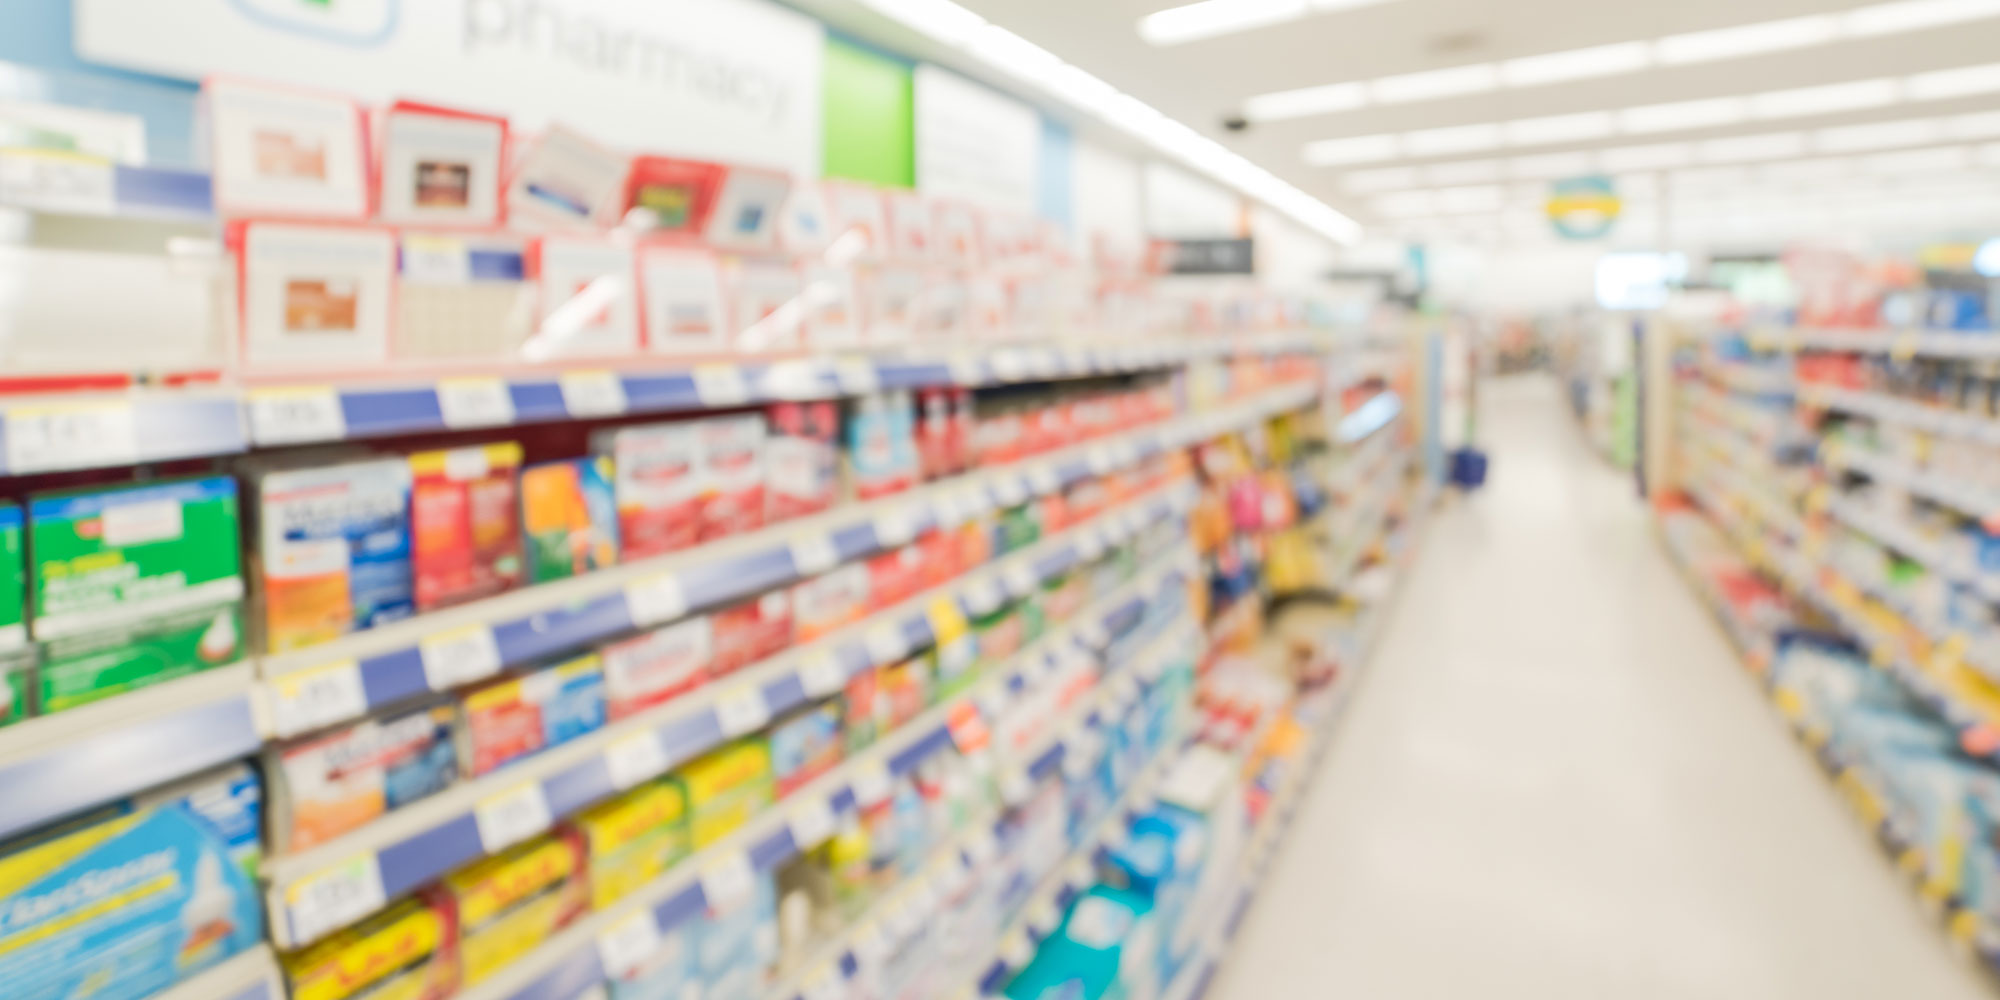 Blurred abstract background inside pharmacy store with arranged variation of pharmaceutical and medical supplies product in label on shelves display.